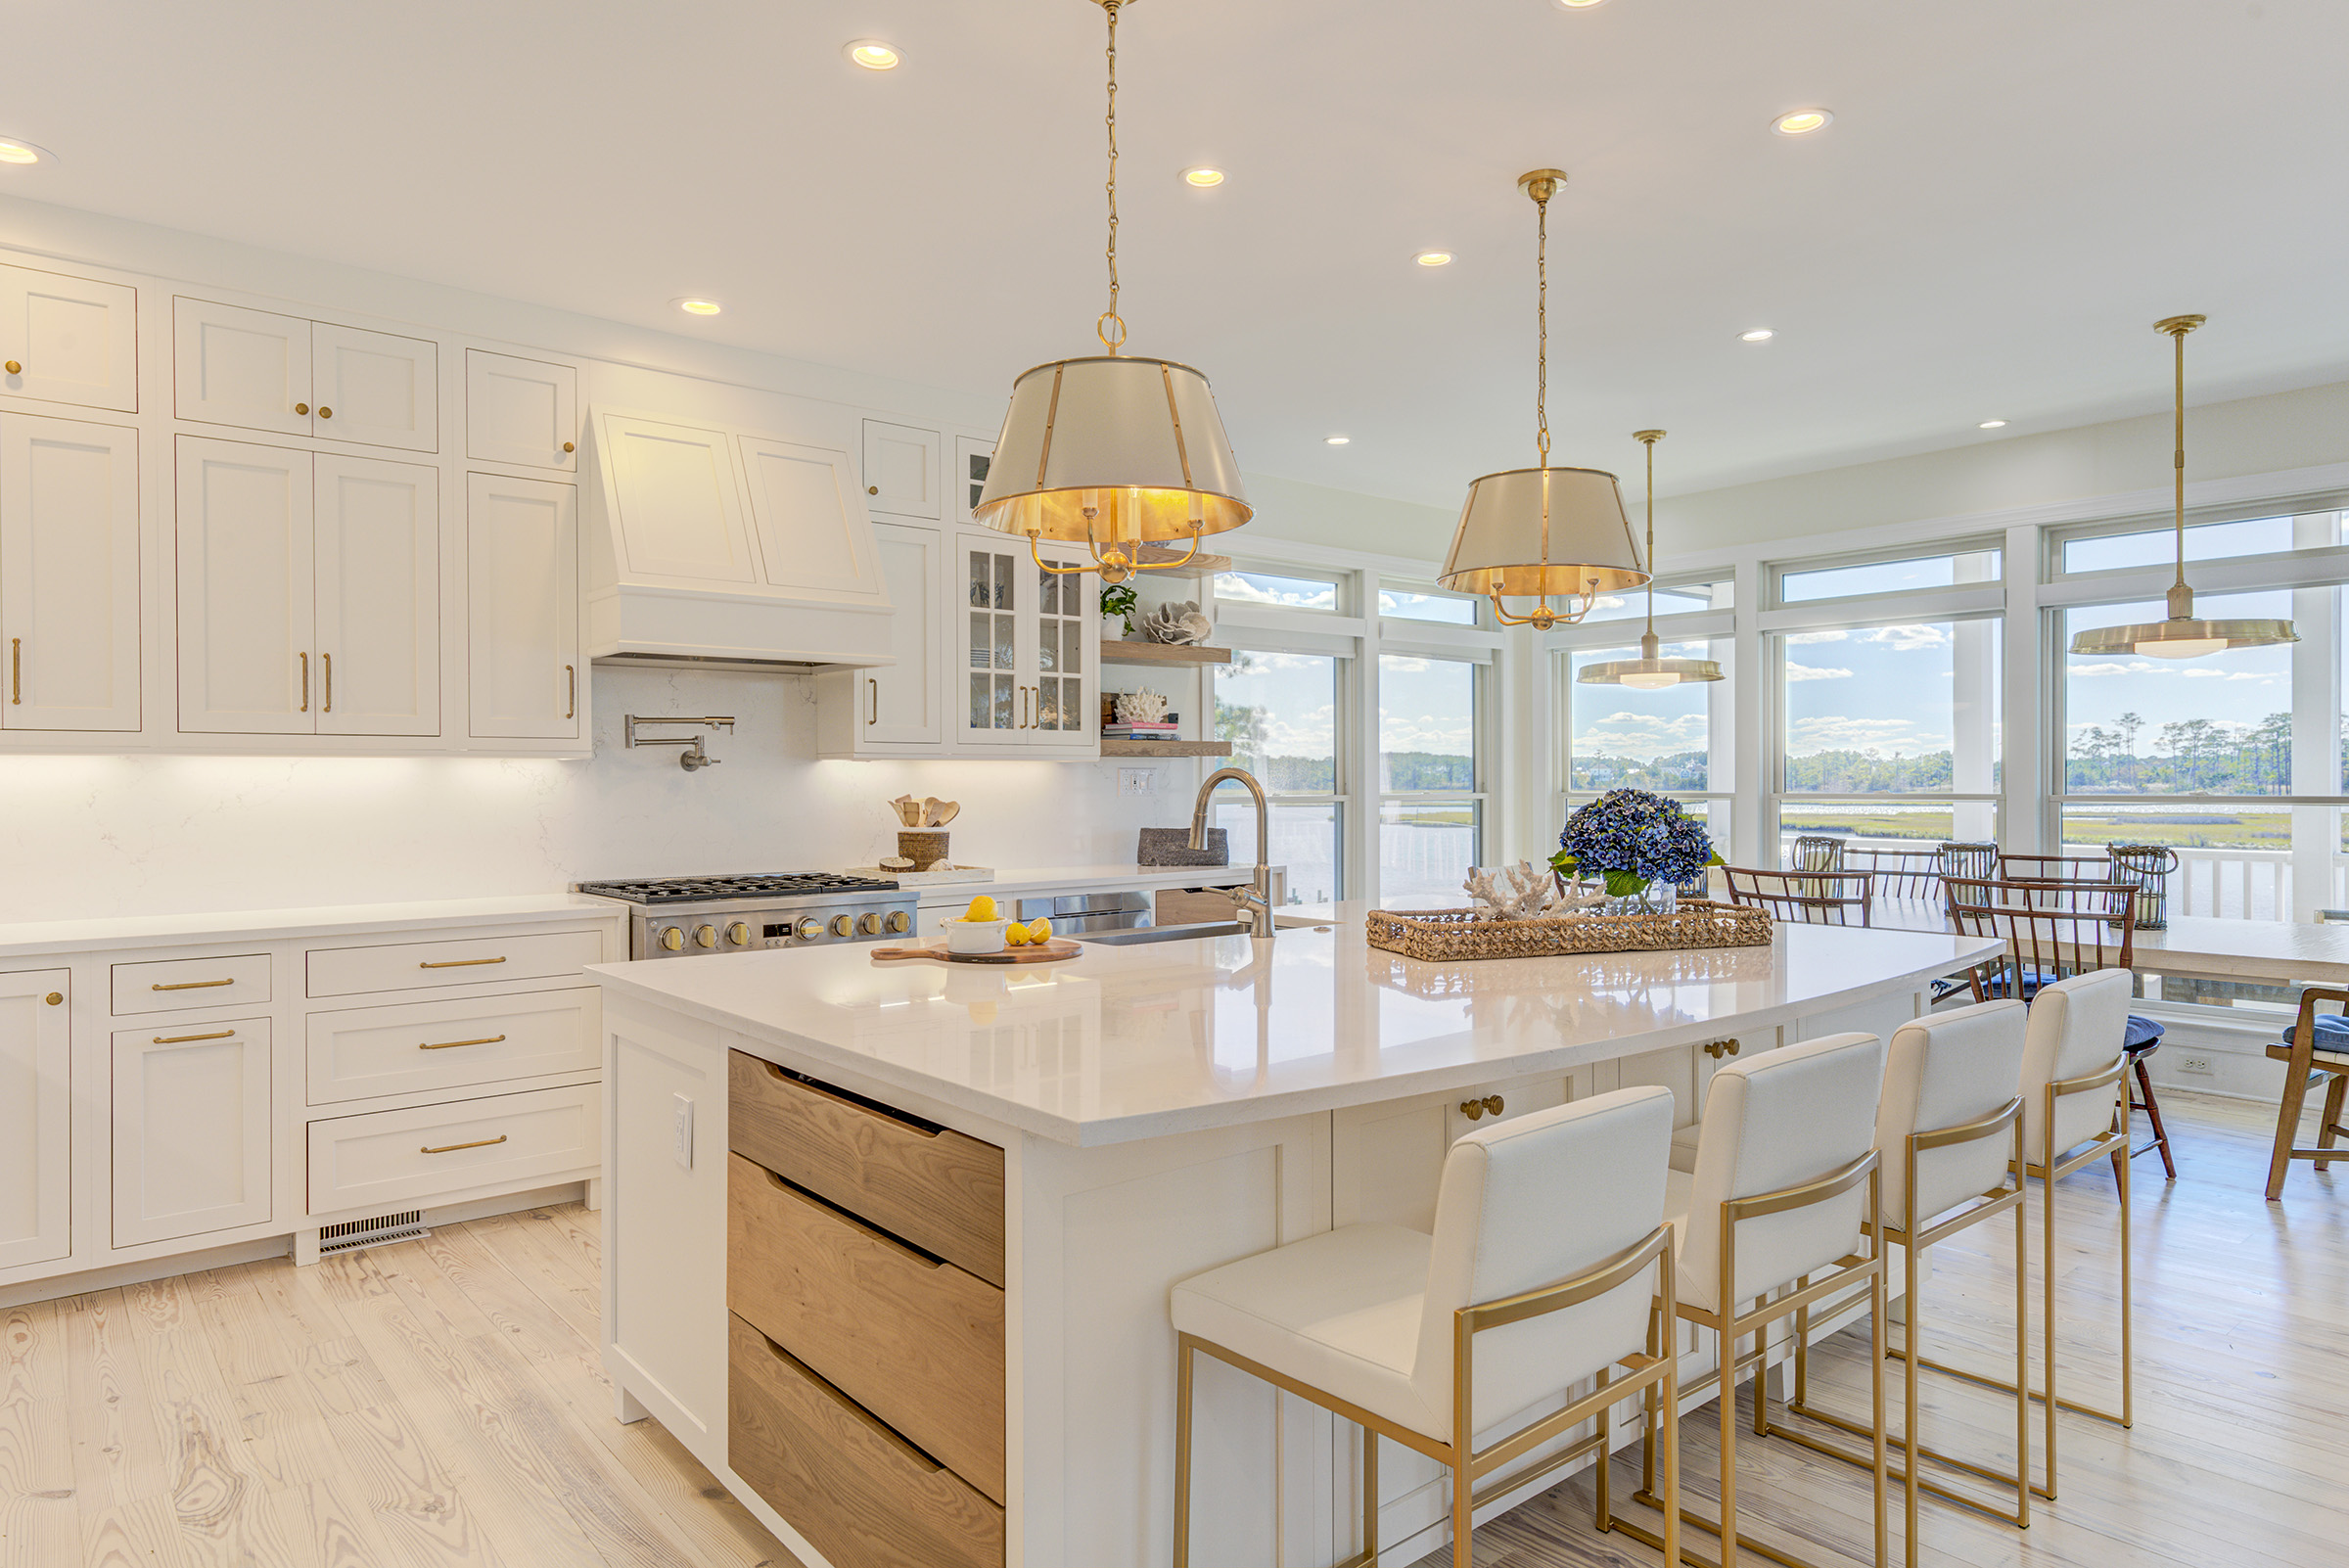 Sea Light Design-Build Pine Road Kitchen Renovation in Selbyville Delaware - open floor plan marries with dining room and living room beautifully